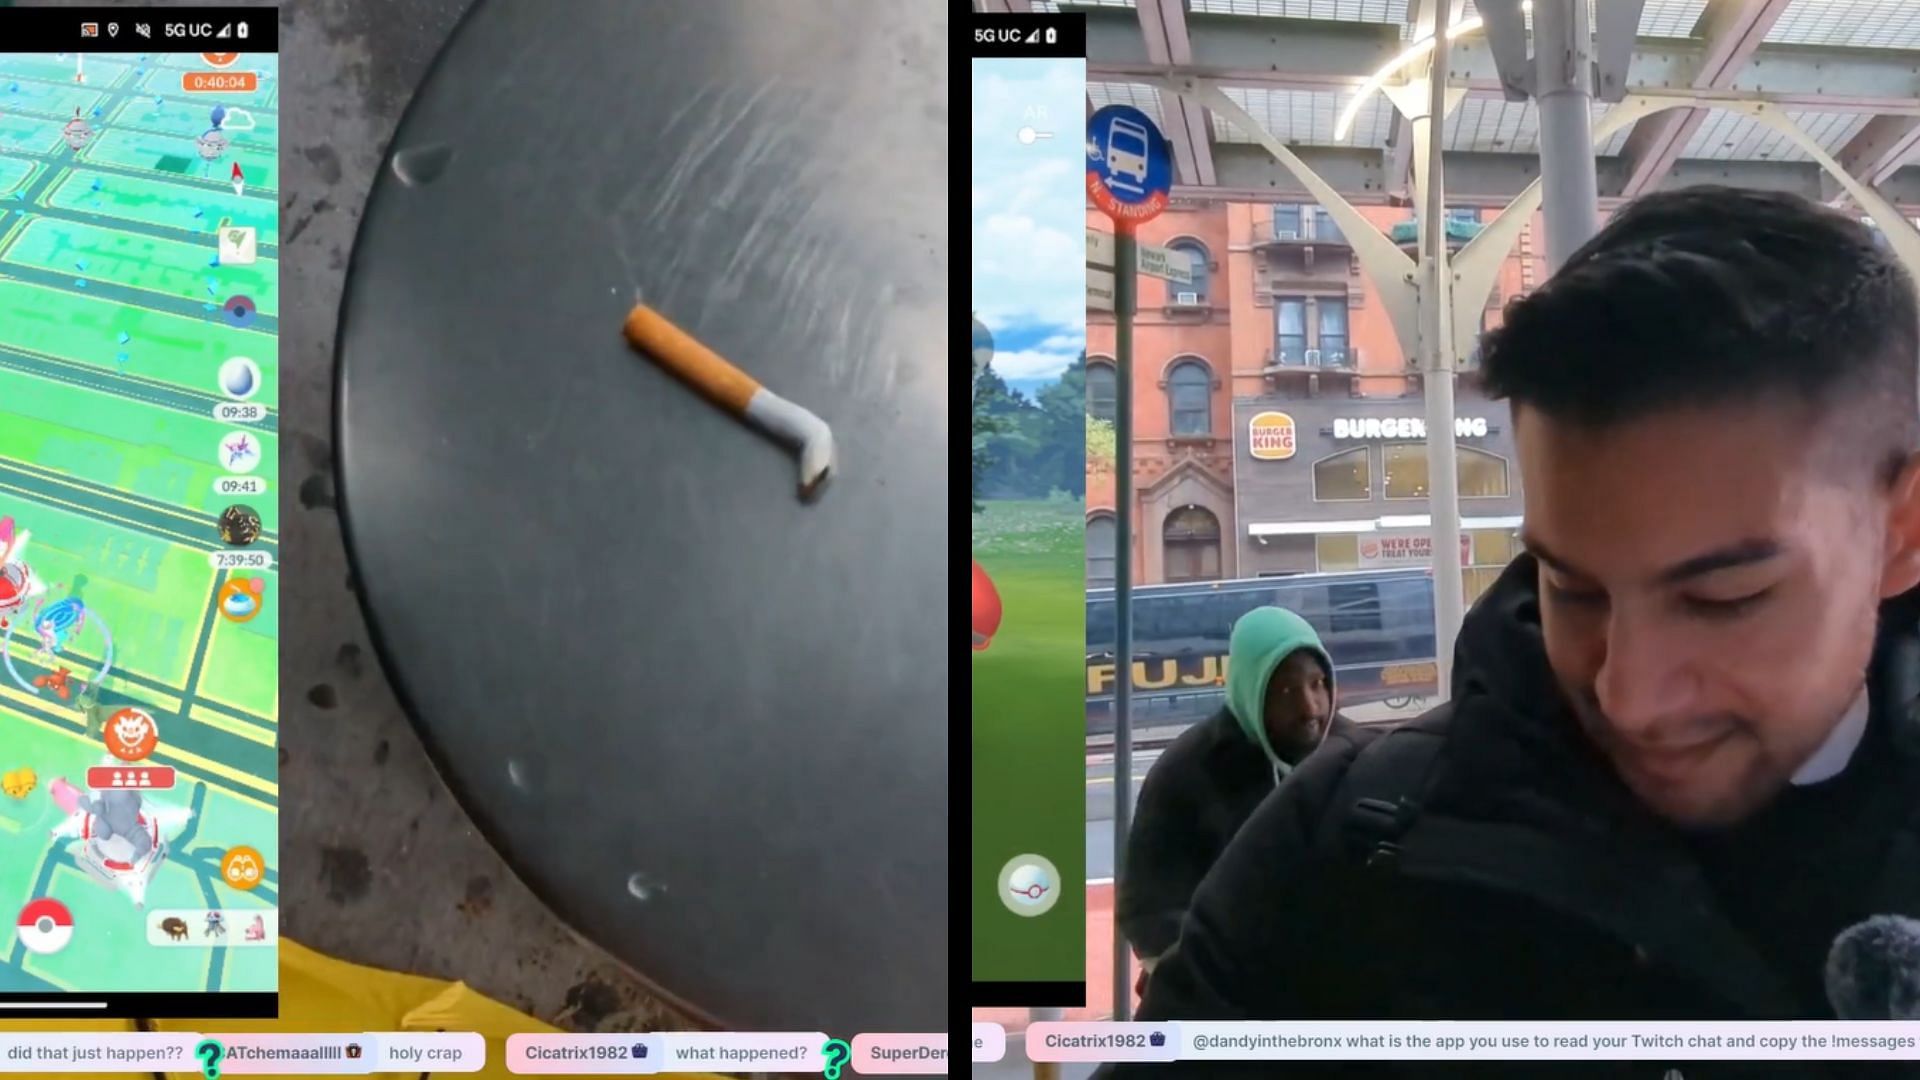 Stranger dumped a burning cigarette into a Twitch streamer